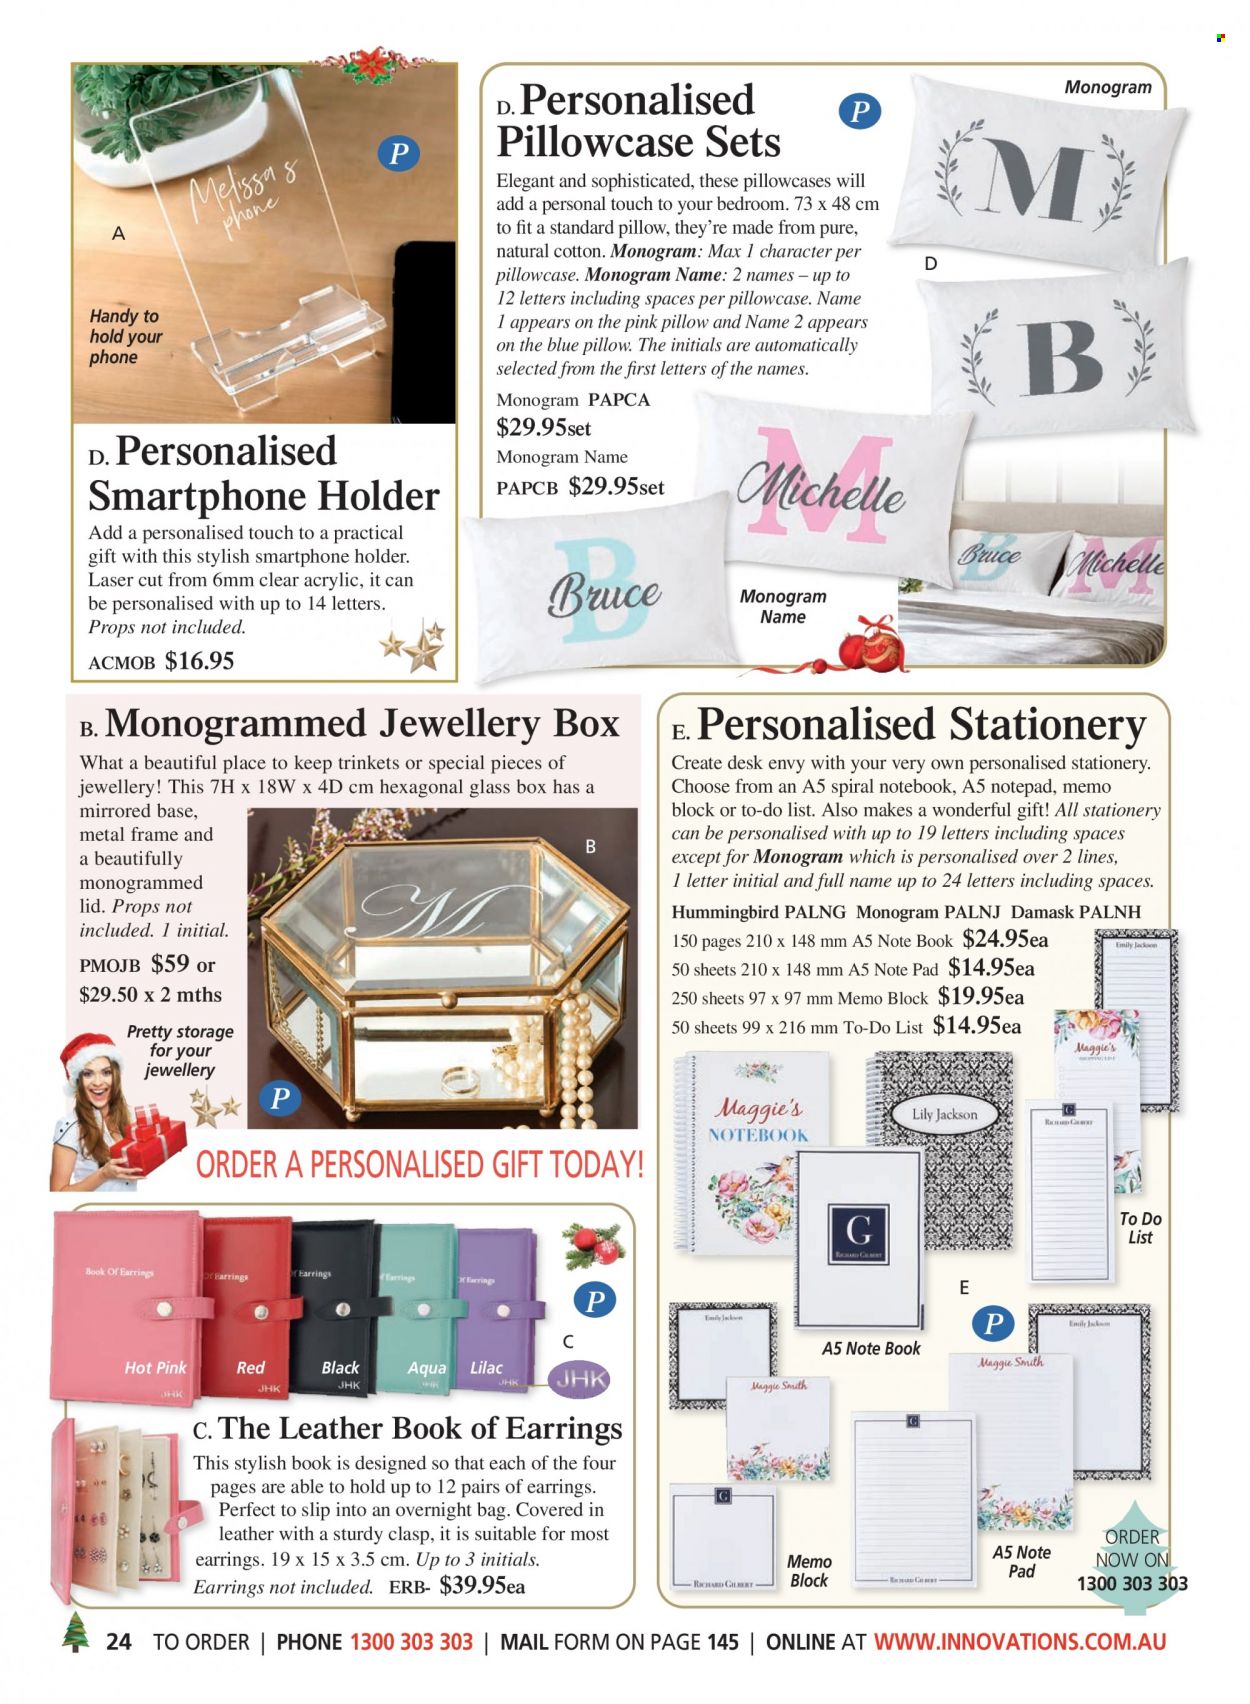 thumbnail - Innovations Catalogue - Sales products - lid, memo book, pillow, pillowcase, earrings. Page 24.